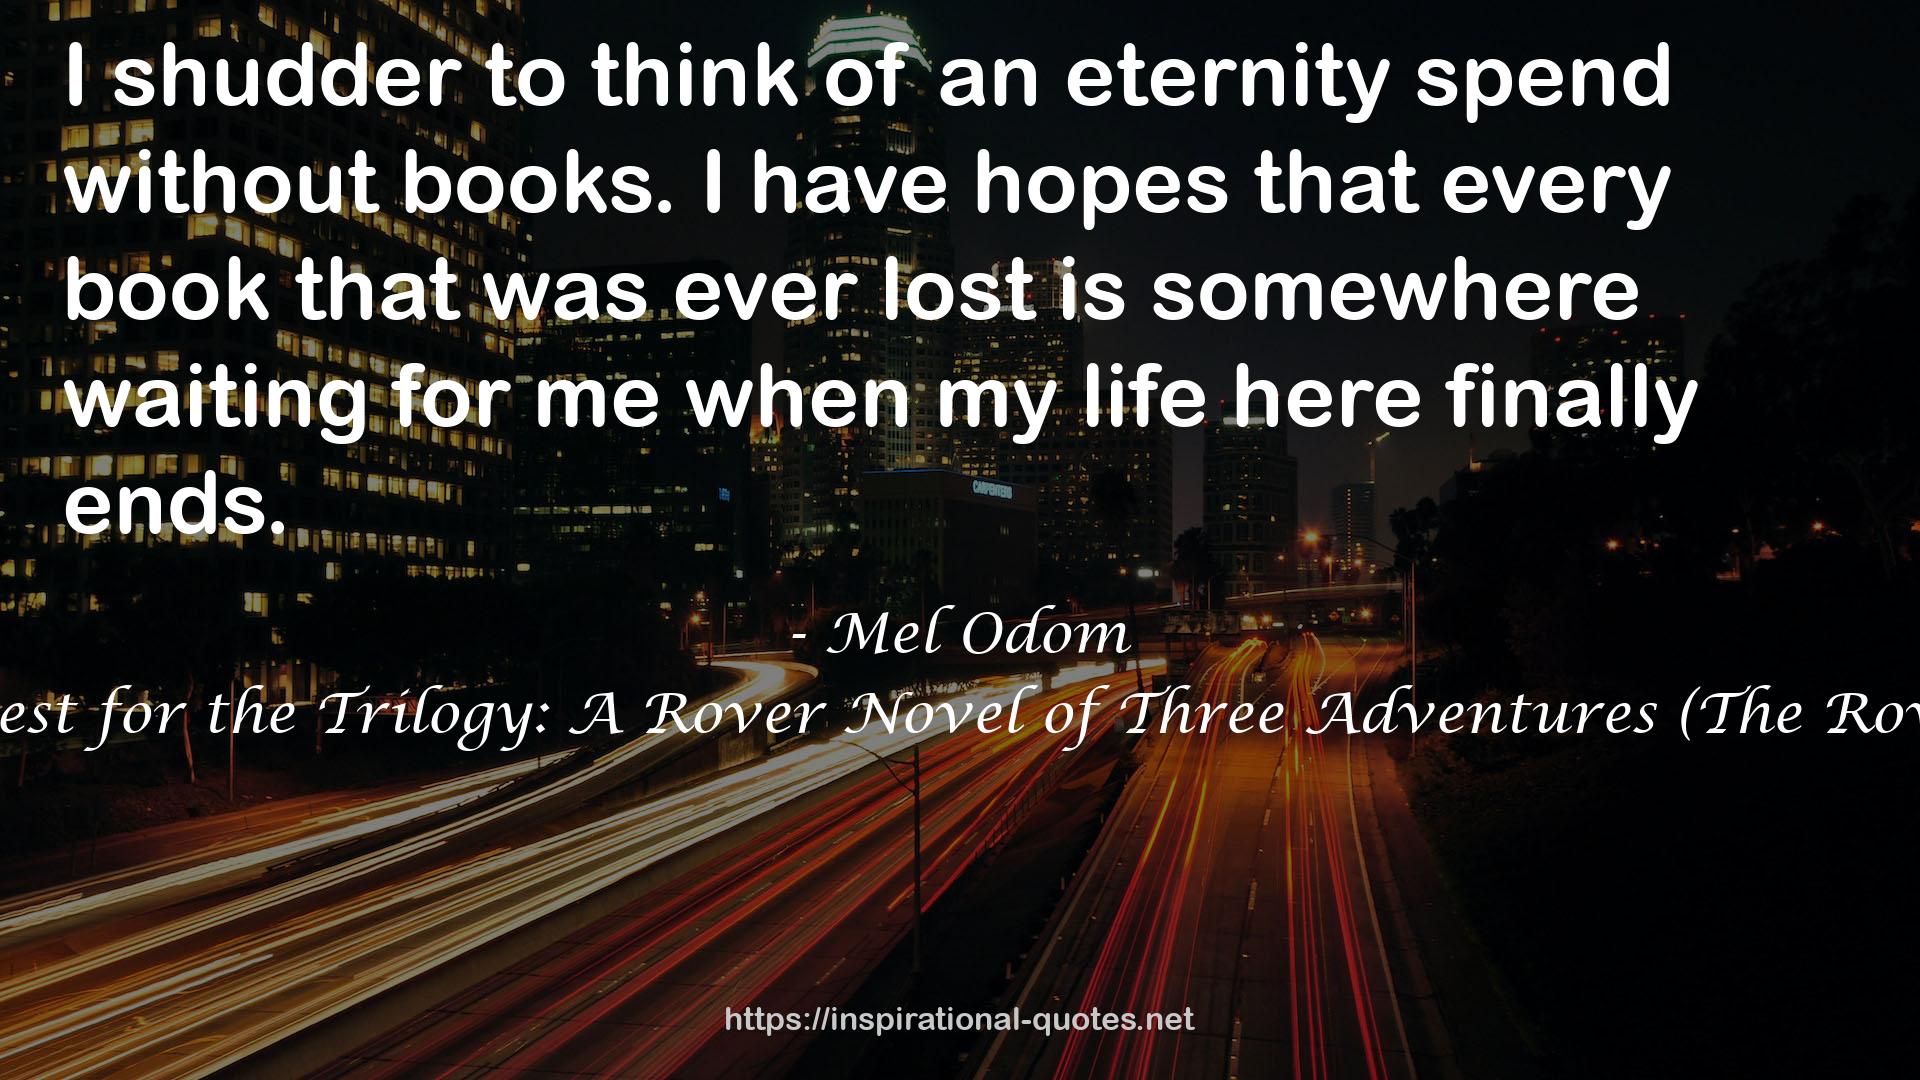 The Quest for the Trilogy: A Rover Novel of Three Adventures (The Rover, #4) QUOTES